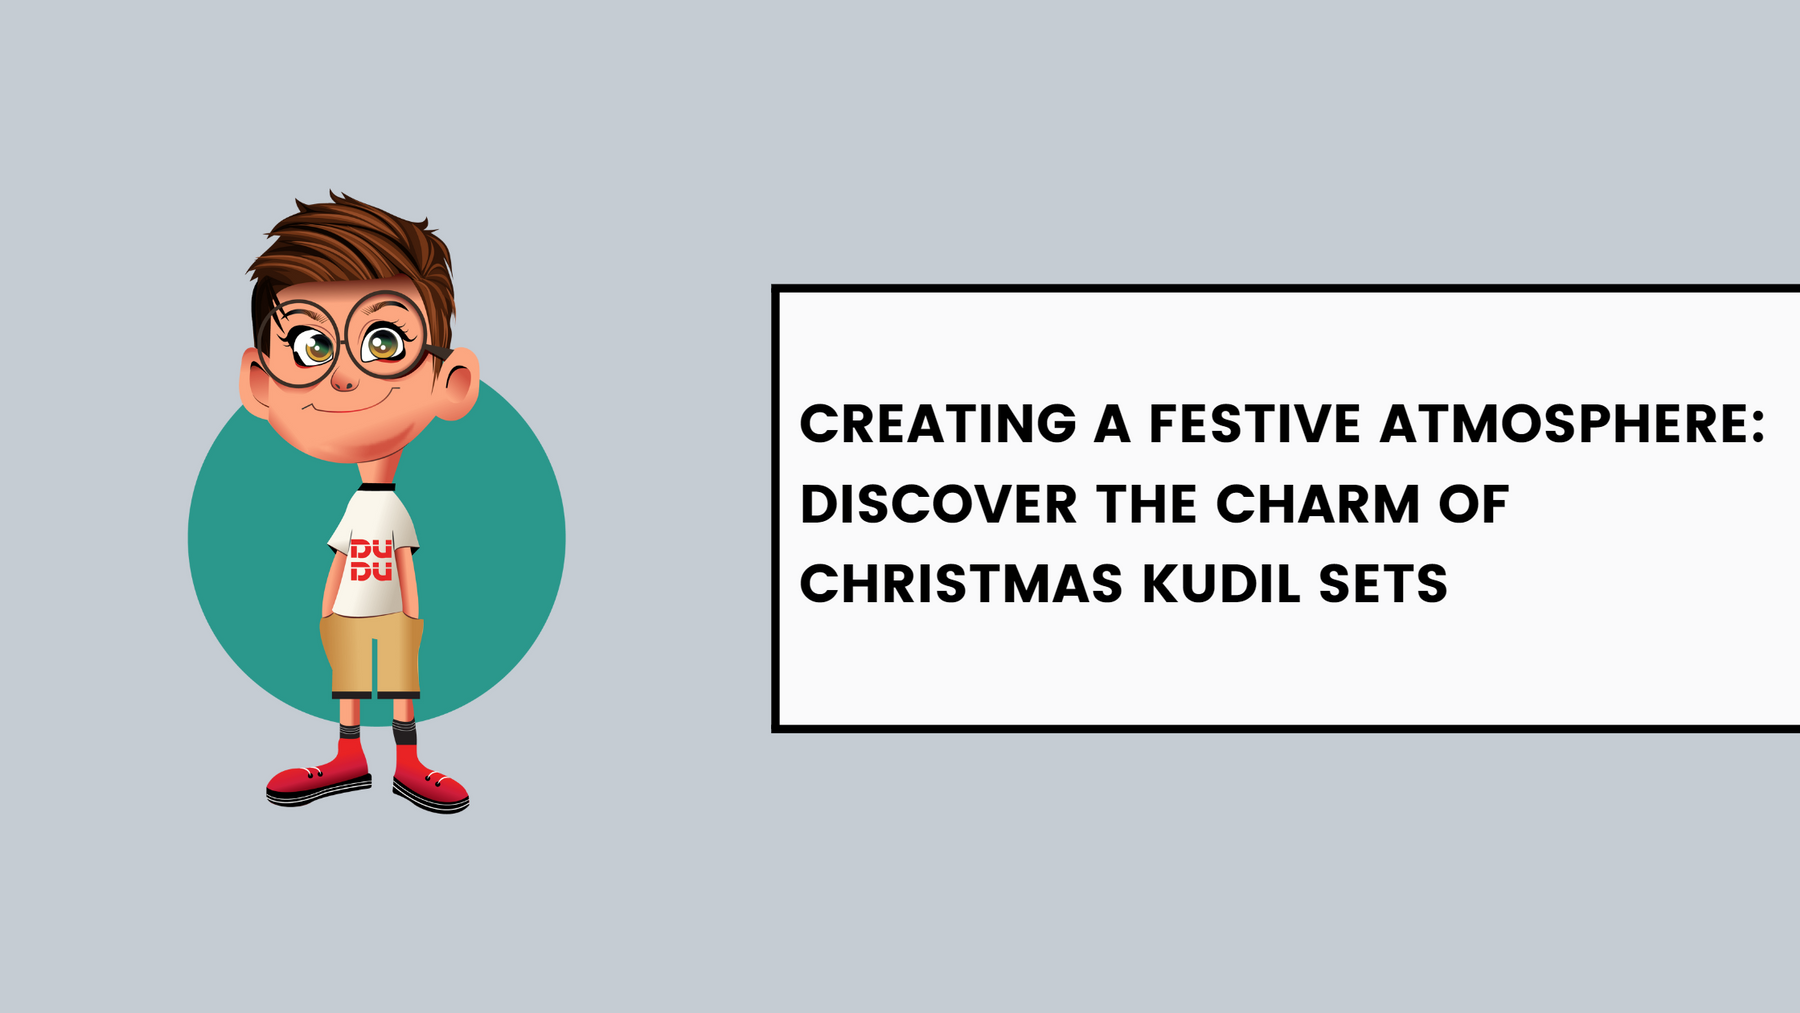 Creating a Festive Atmosphere: Discover the Charm of Christmas Kudil Sets